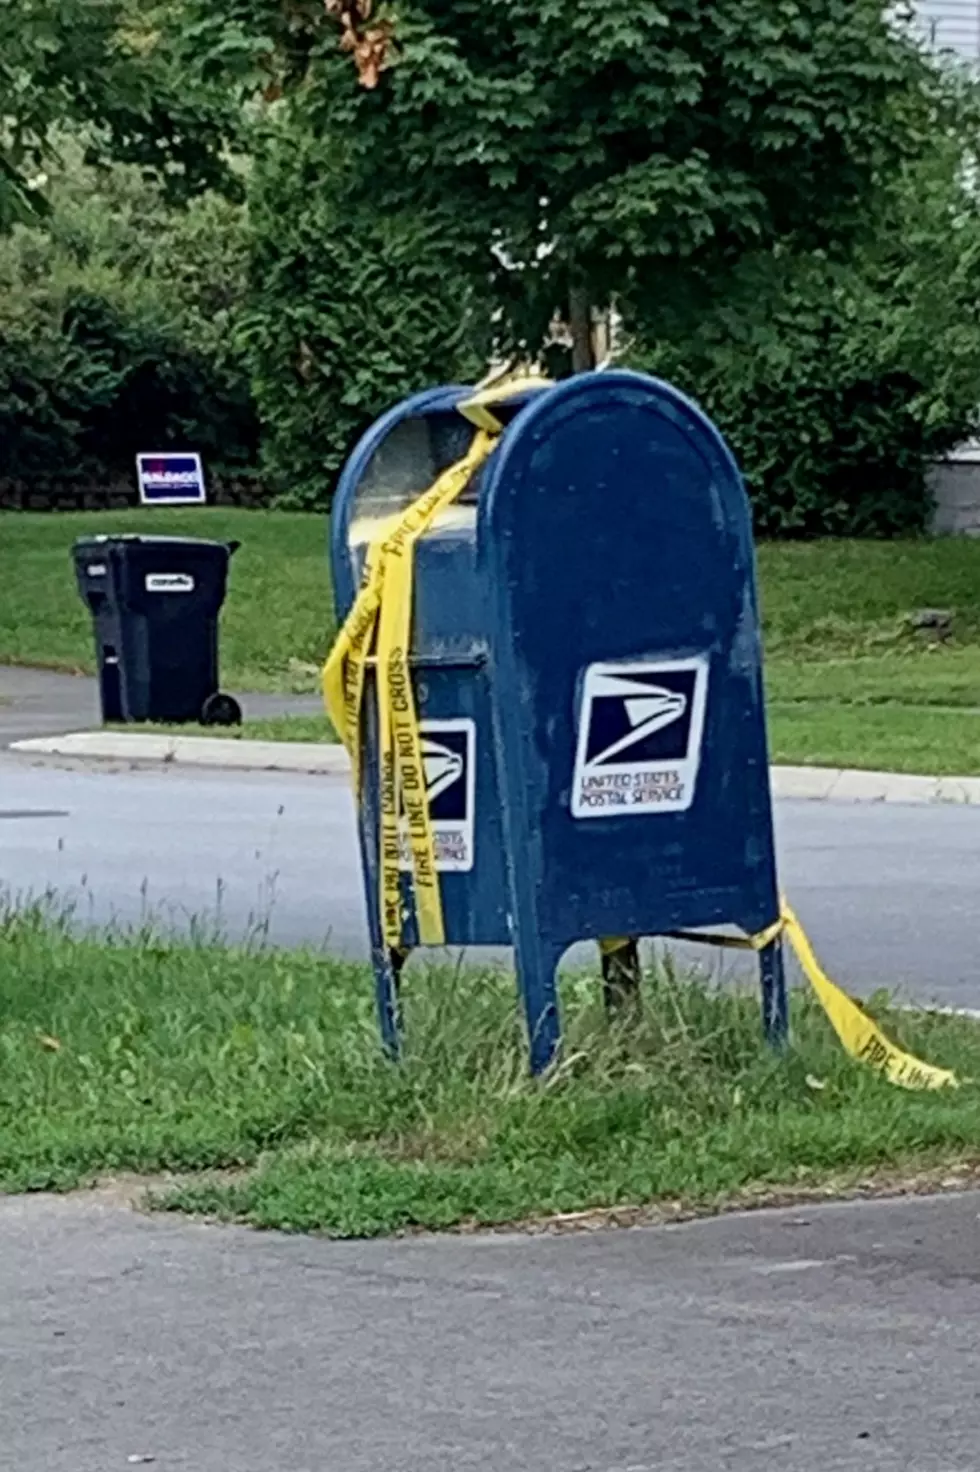 Fireworks And Mailboxes Don’t Mix